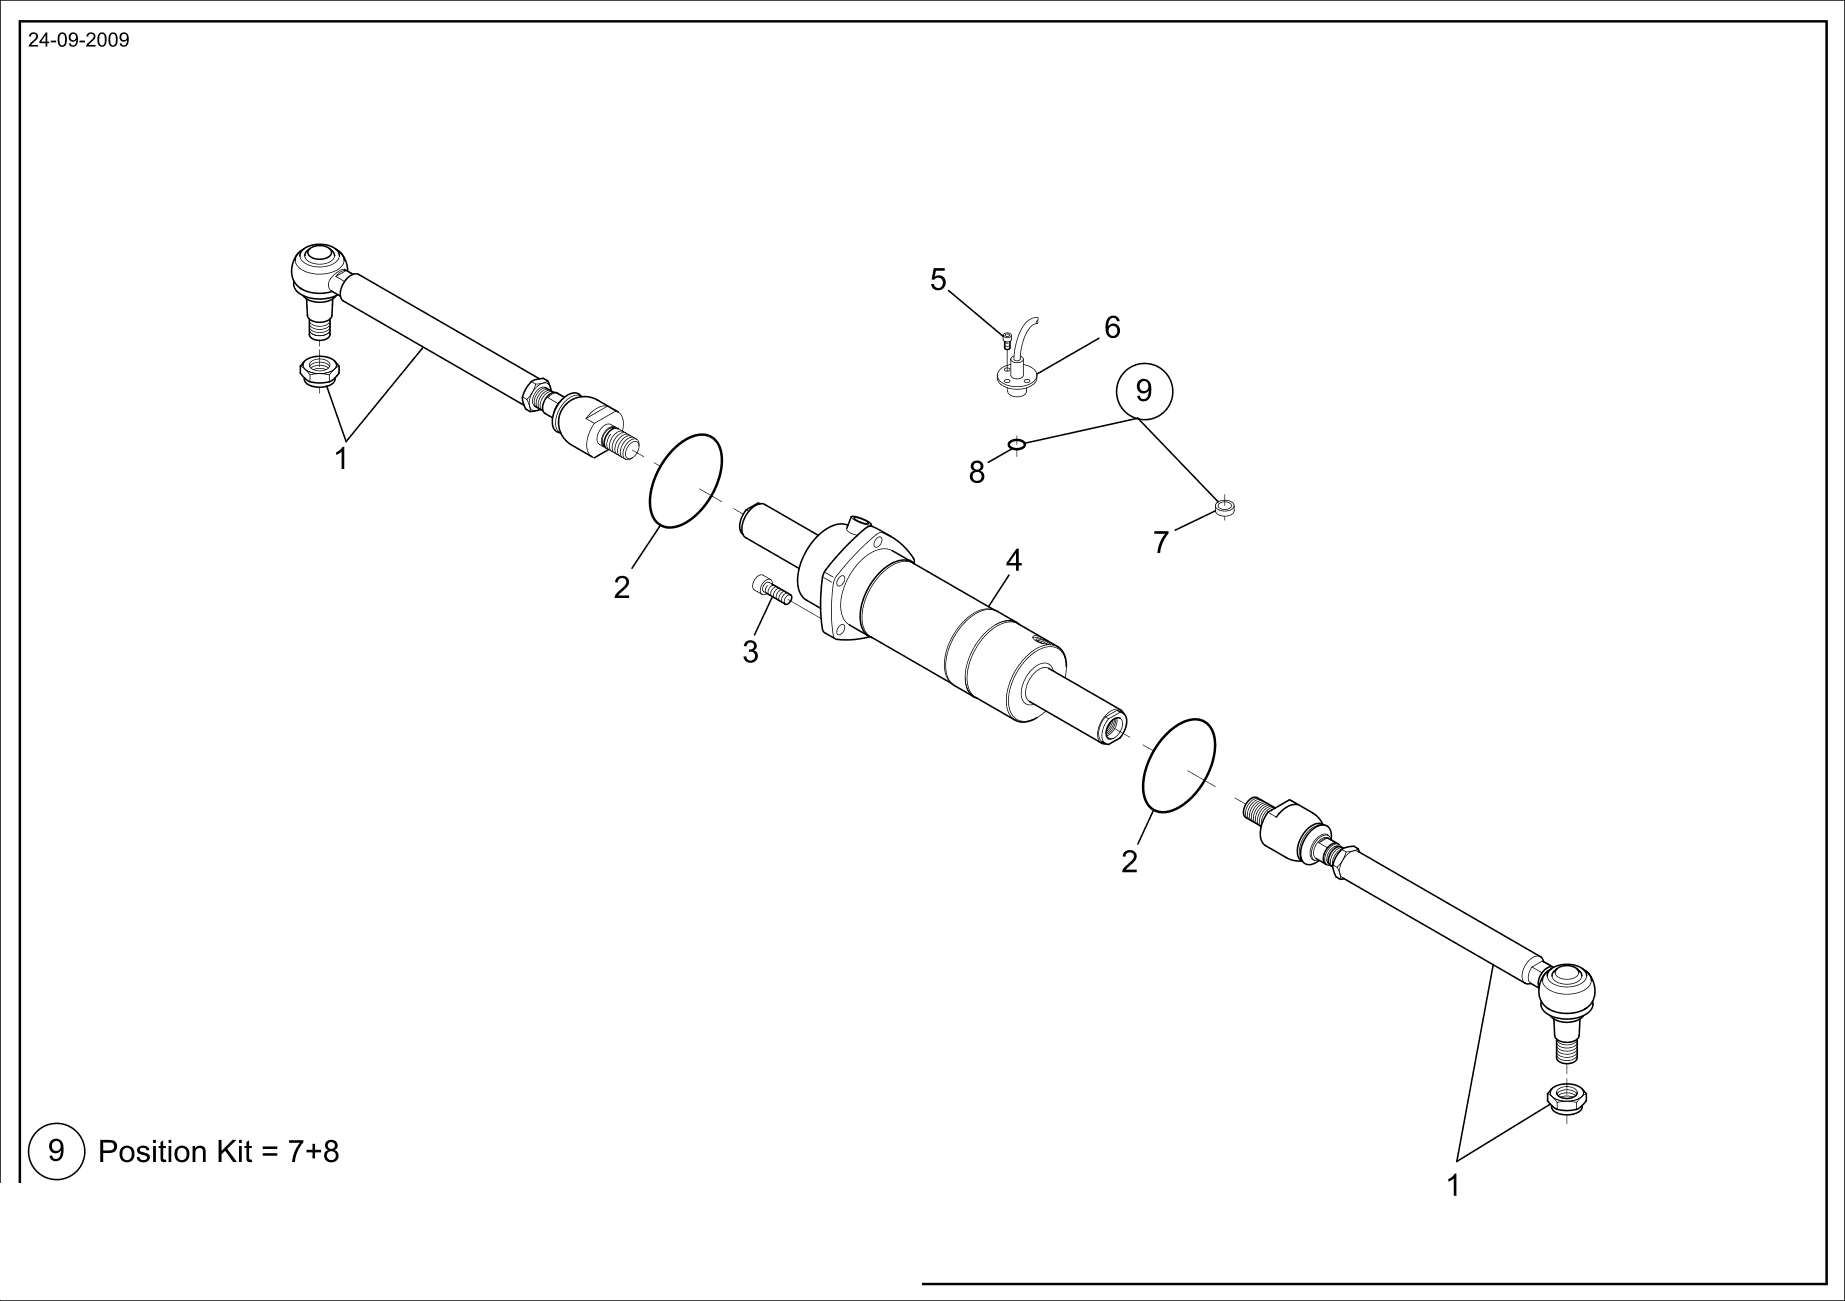 drawing for WEILER 6707 - ARTICULATED TIE ROD (figure 3)